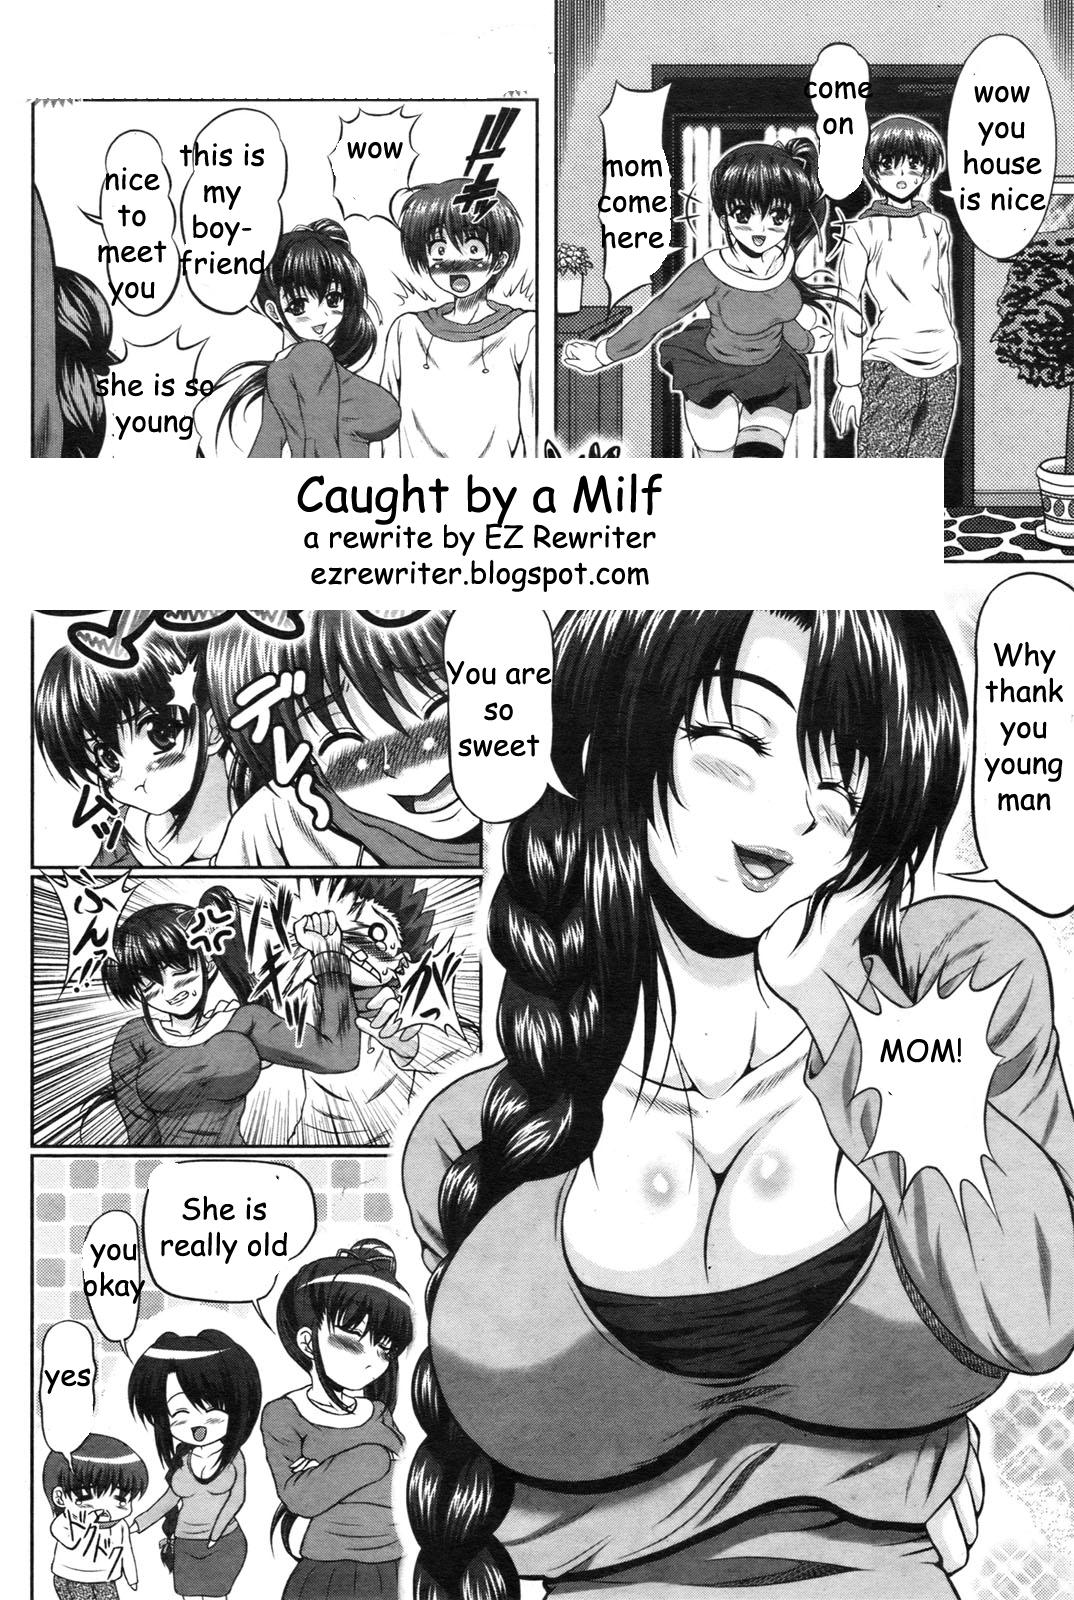 Caught by a Milf 2